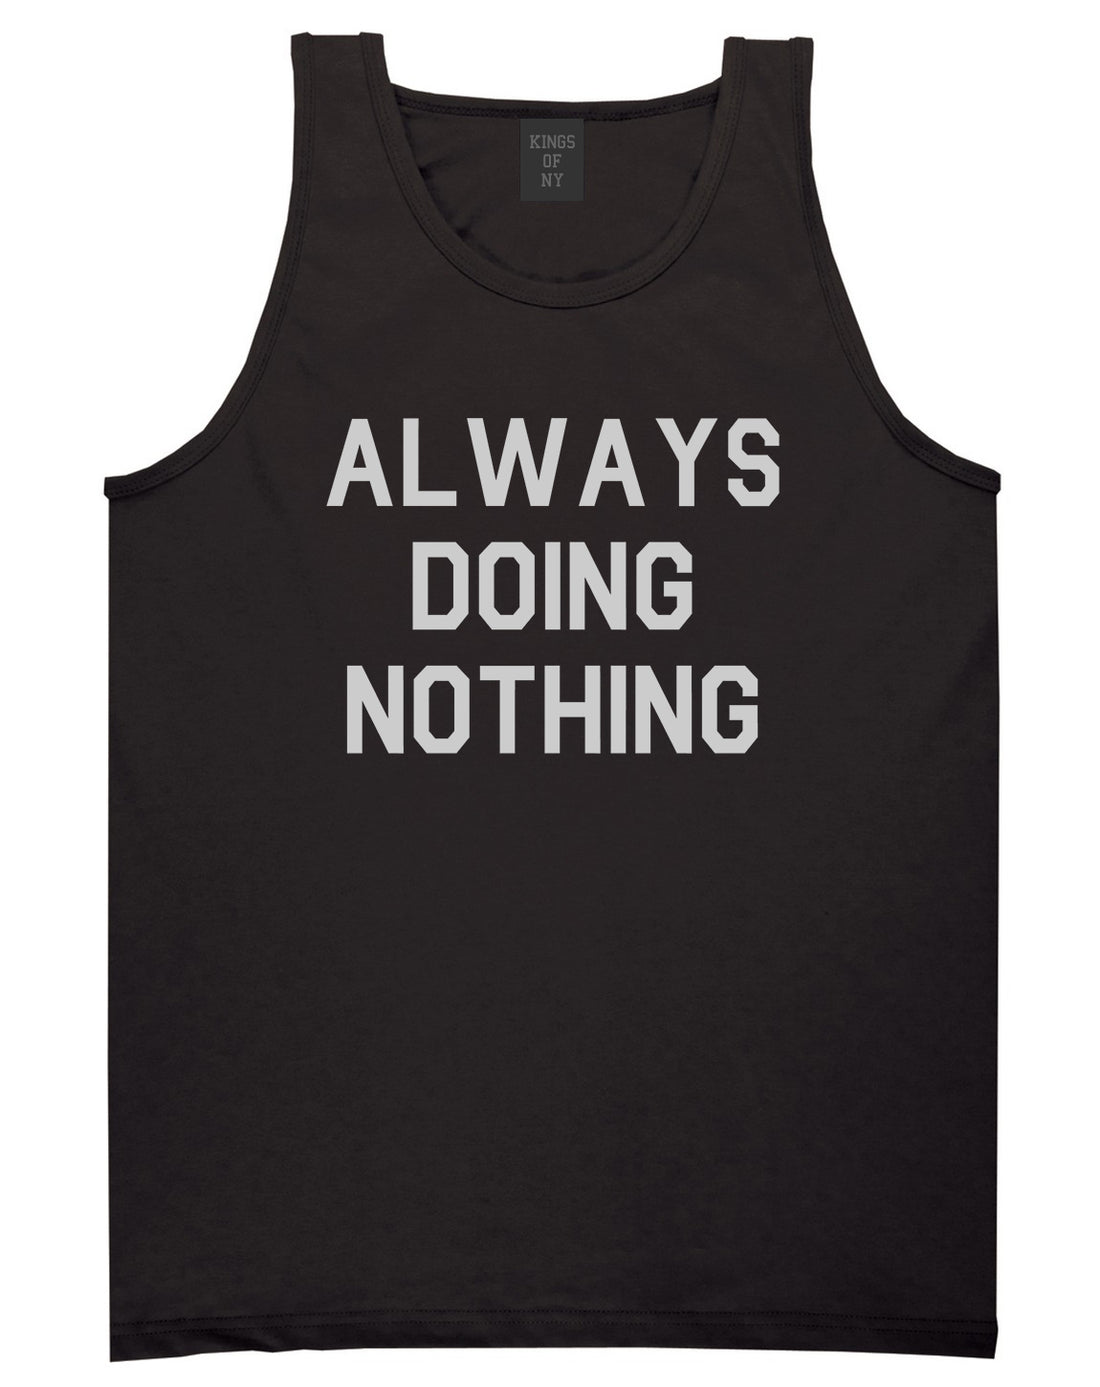 Always_Doing_Nothing Mens Black Tank Top Shirt by Kings Of NY